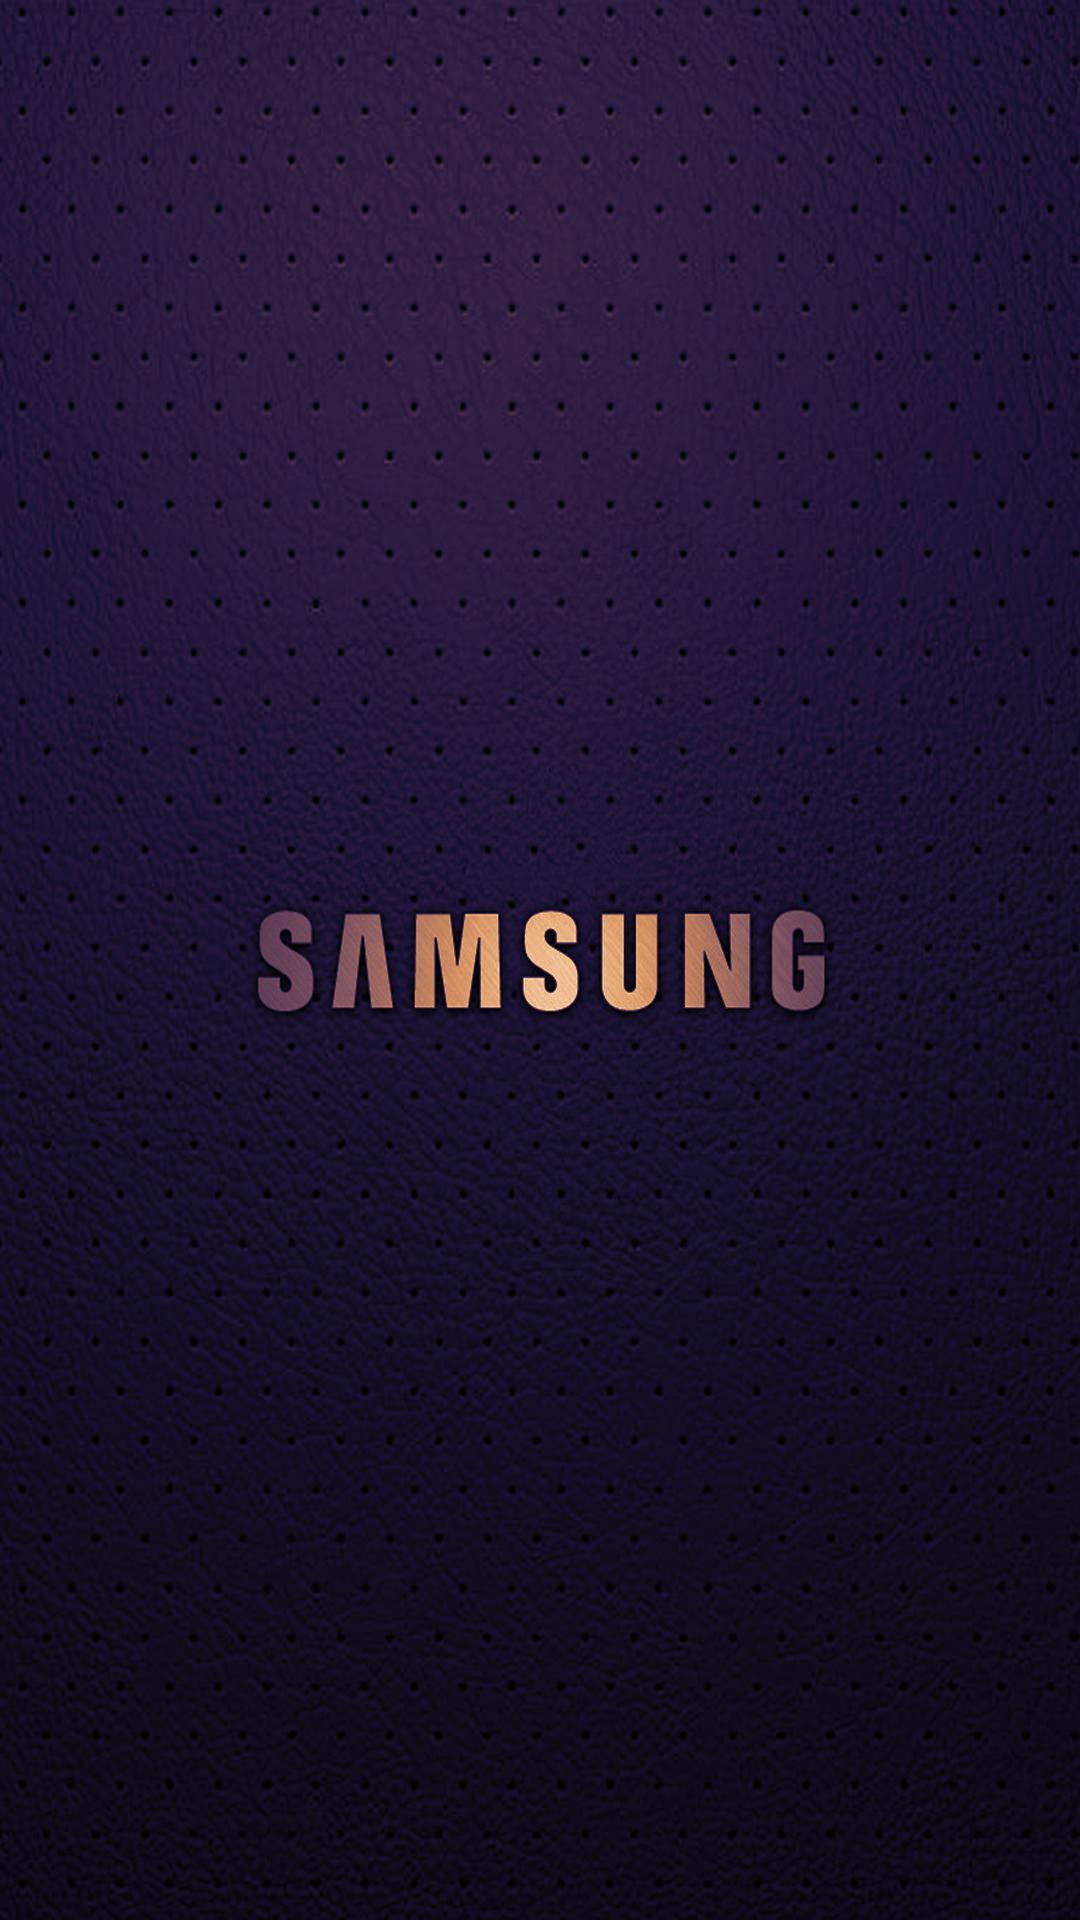 Samsung Phone Wallpapers Group 49